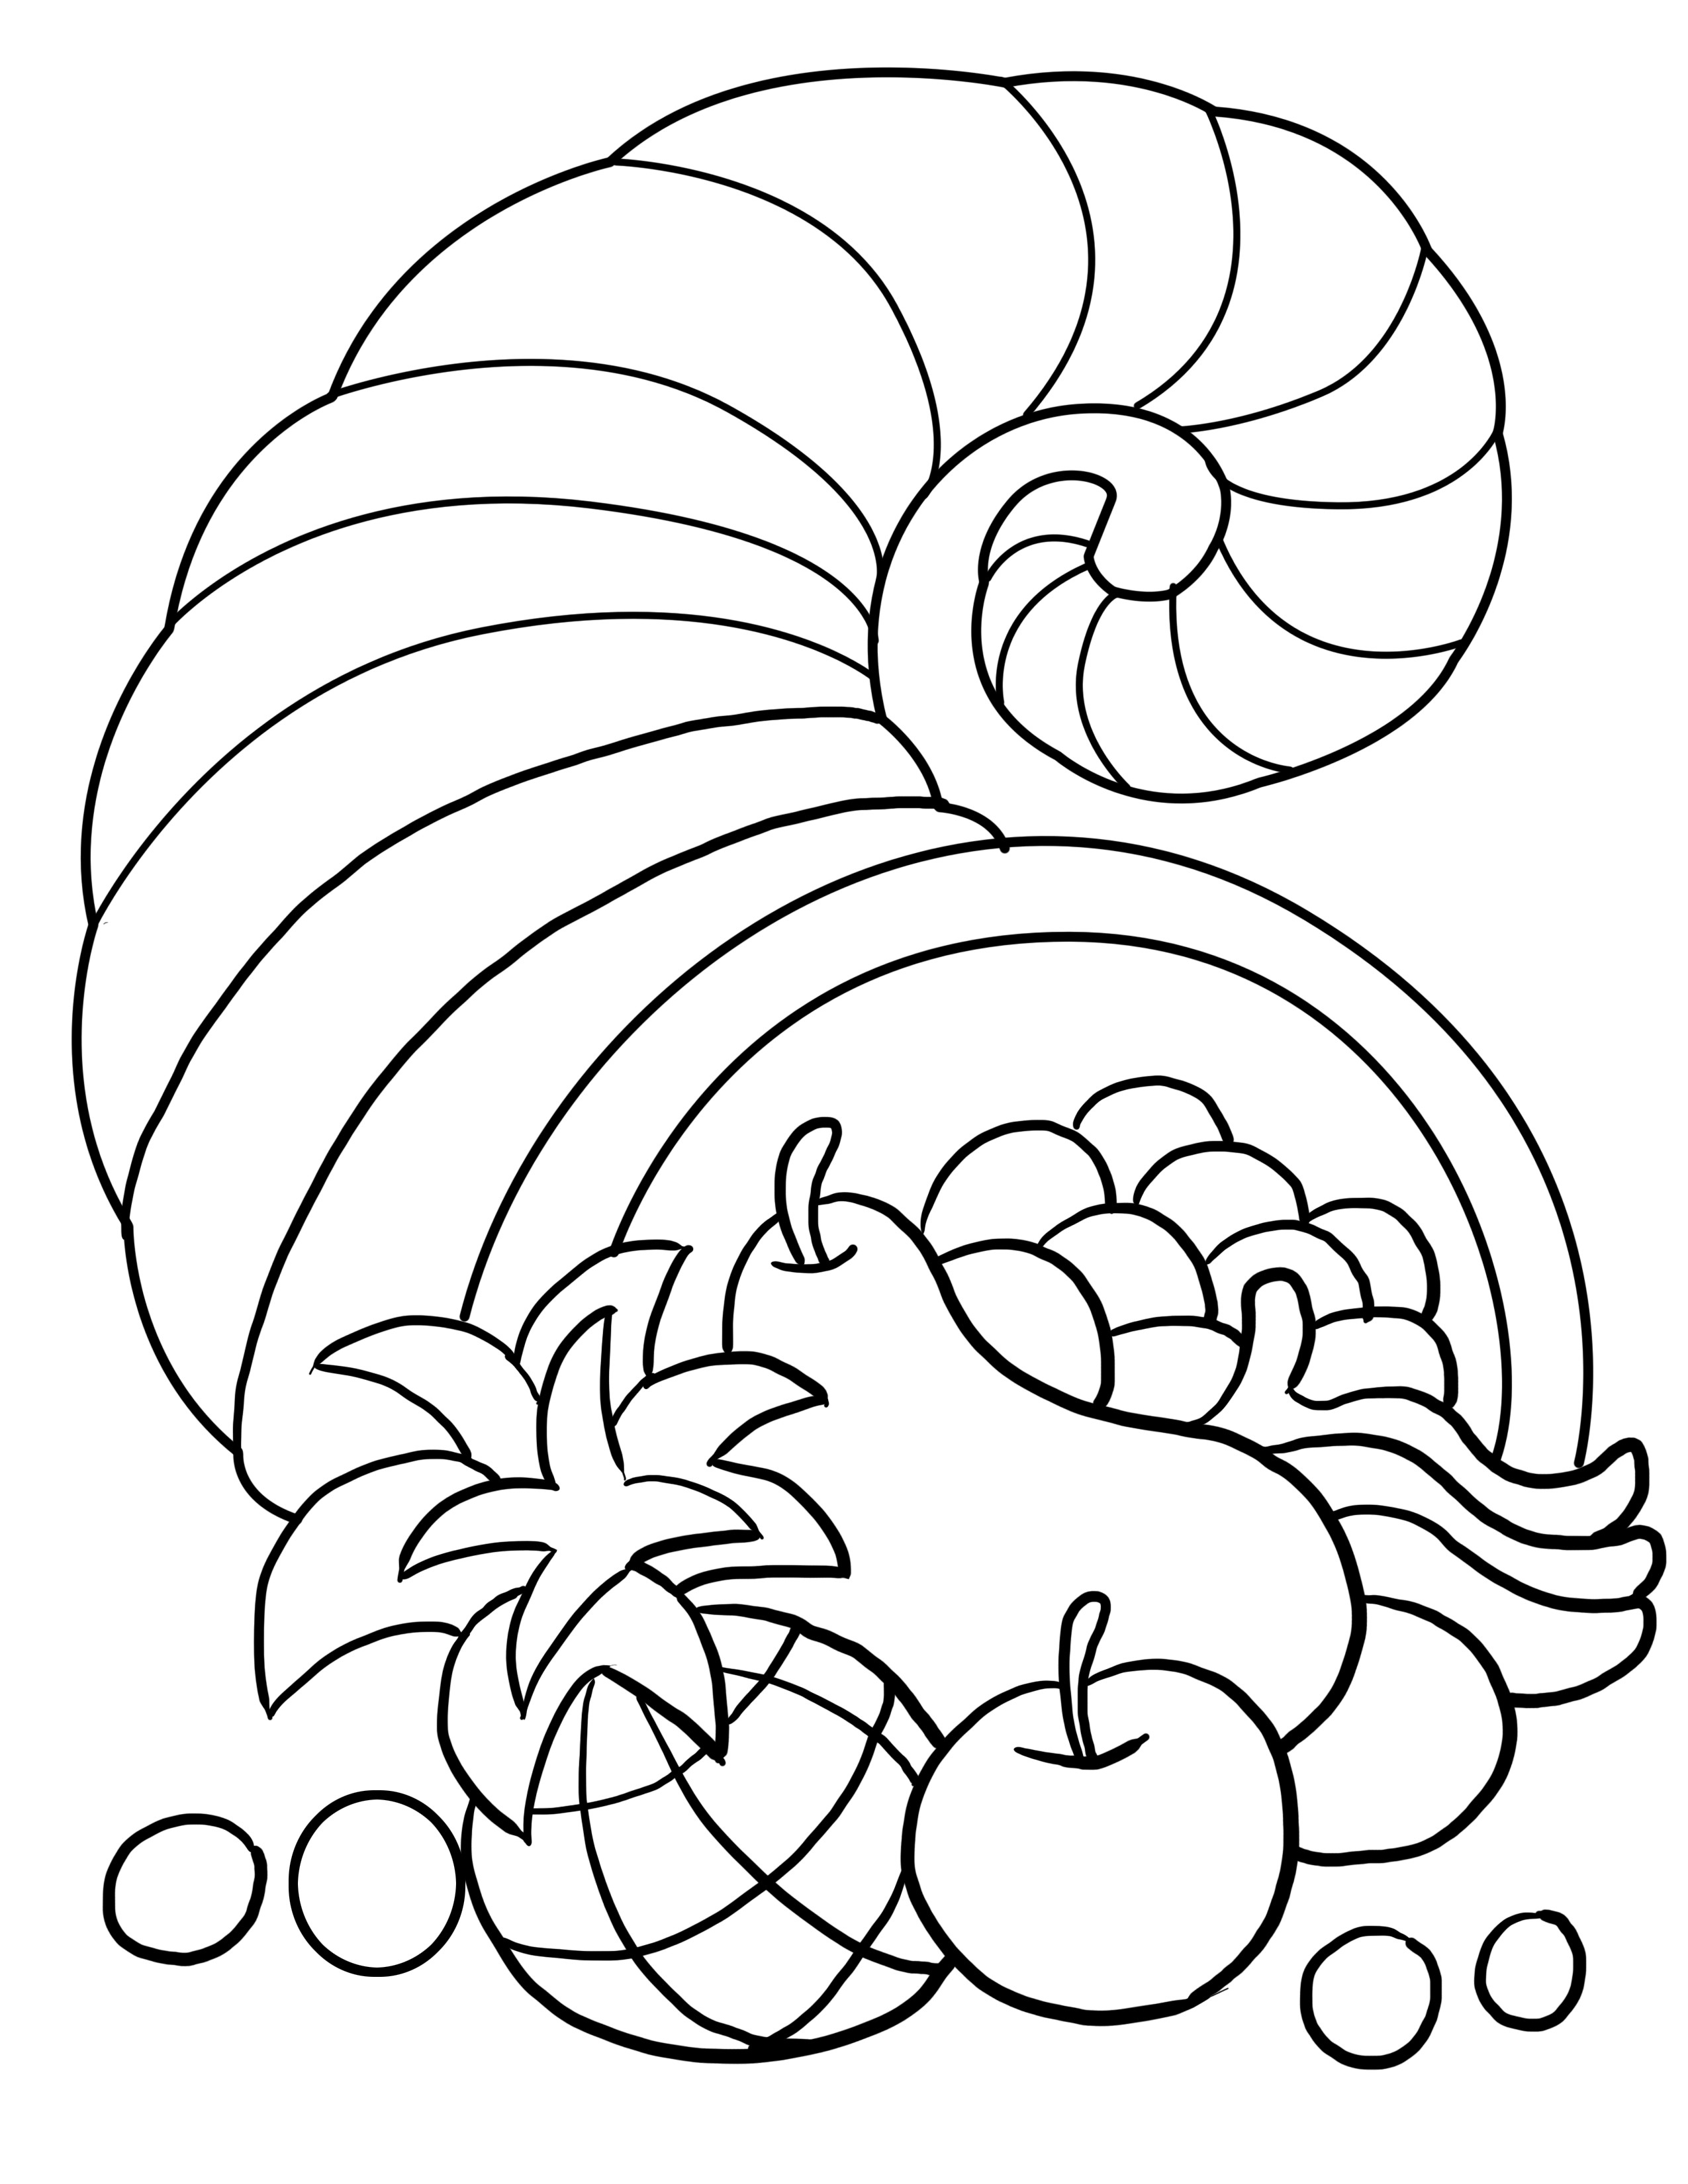 Coloring Pages For Kids Thanksgiving
 Thanksgiving Coloring Pages